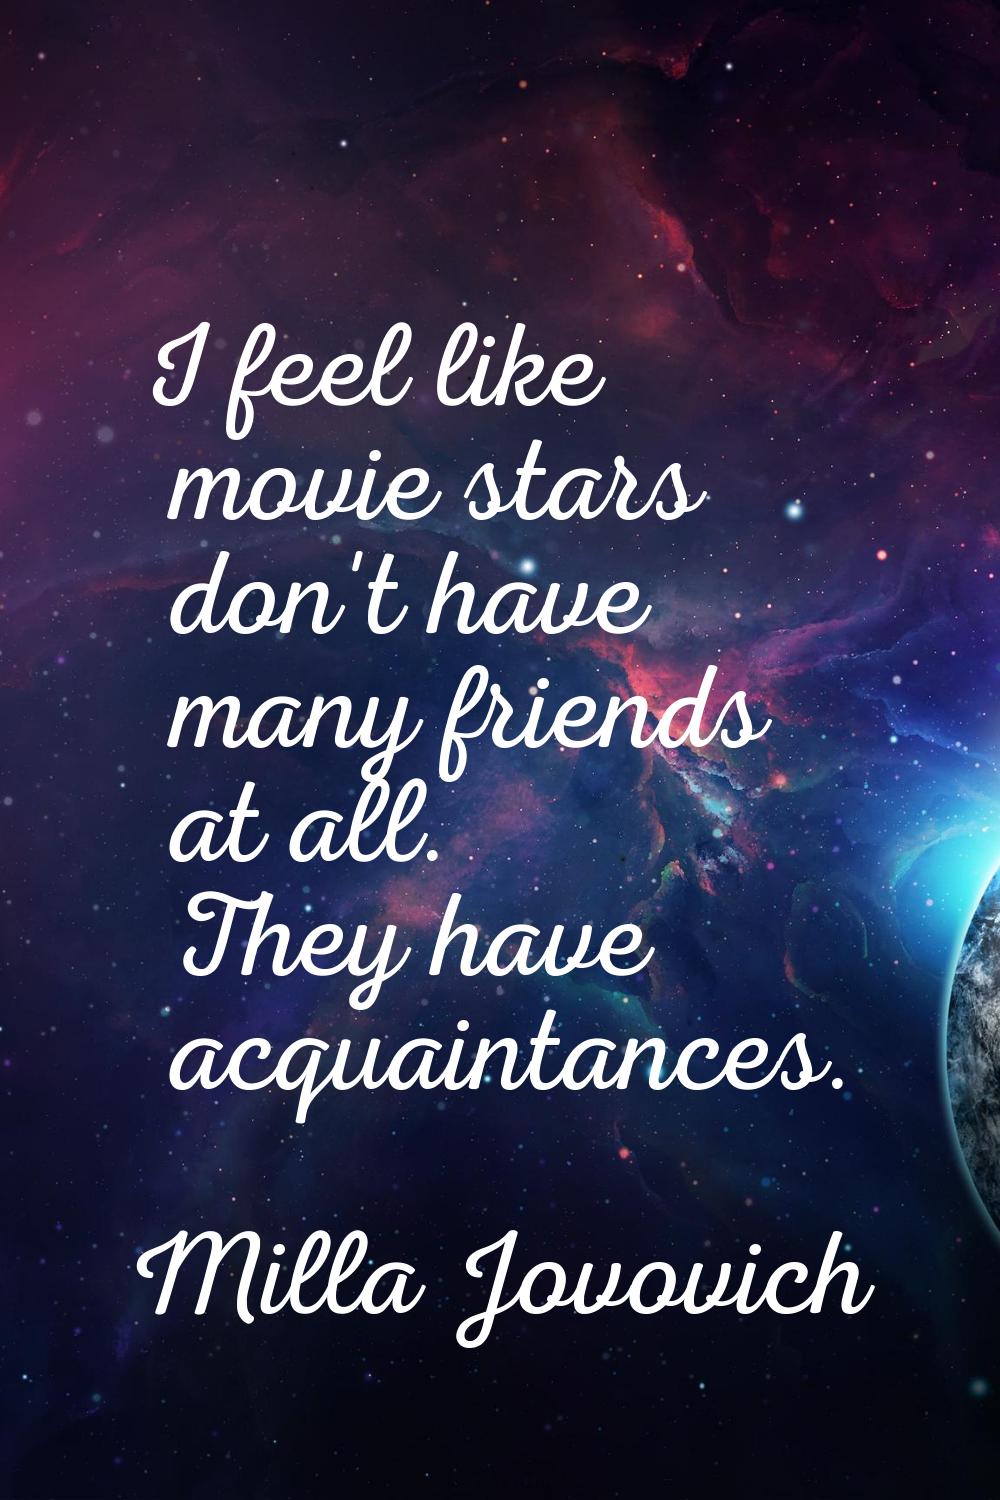 I feel like movie stars don't have many friends at all. They have acquaintances.